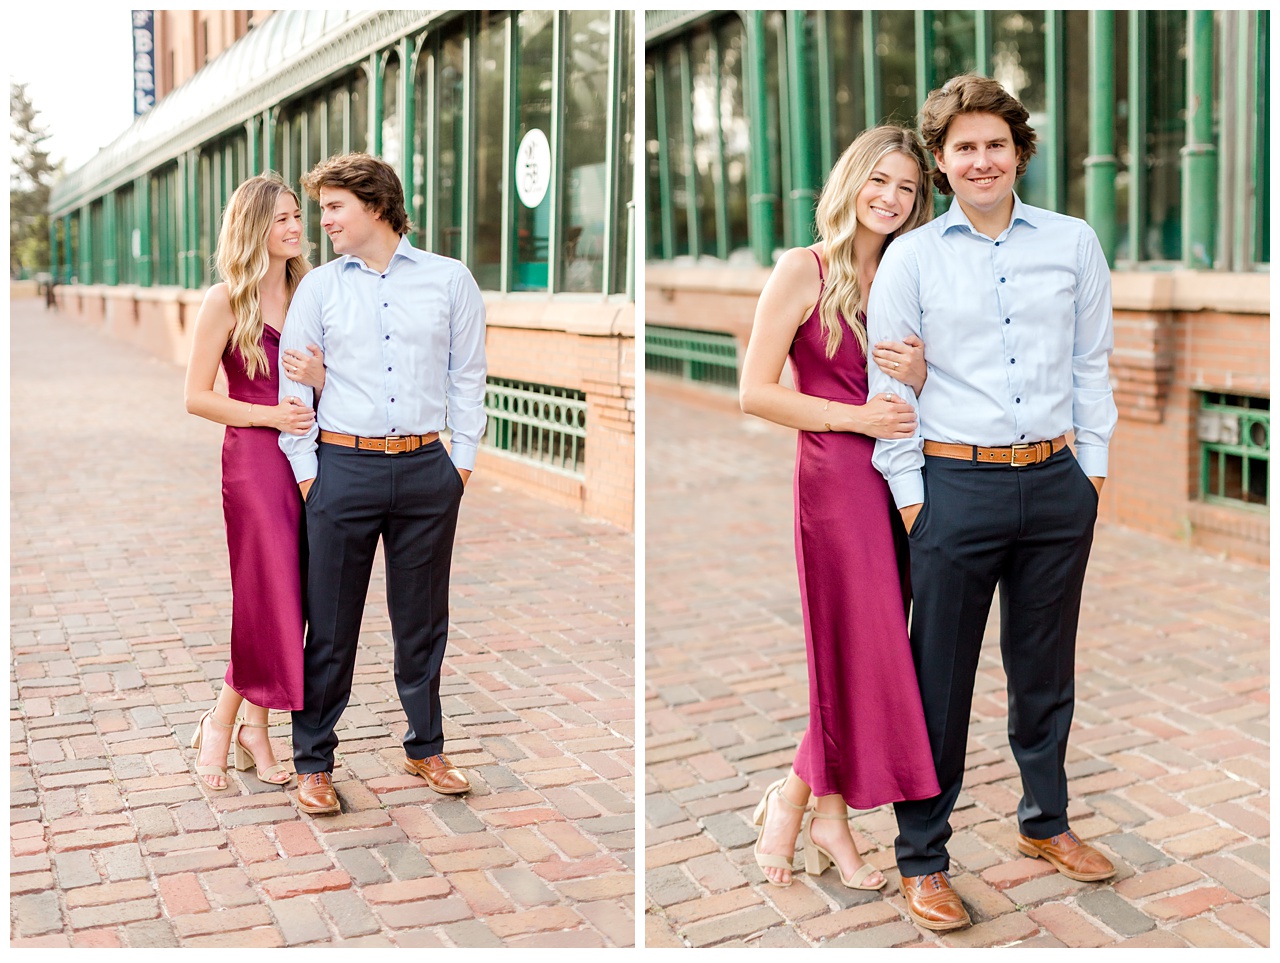 Cobblestone street locations for engagement photos